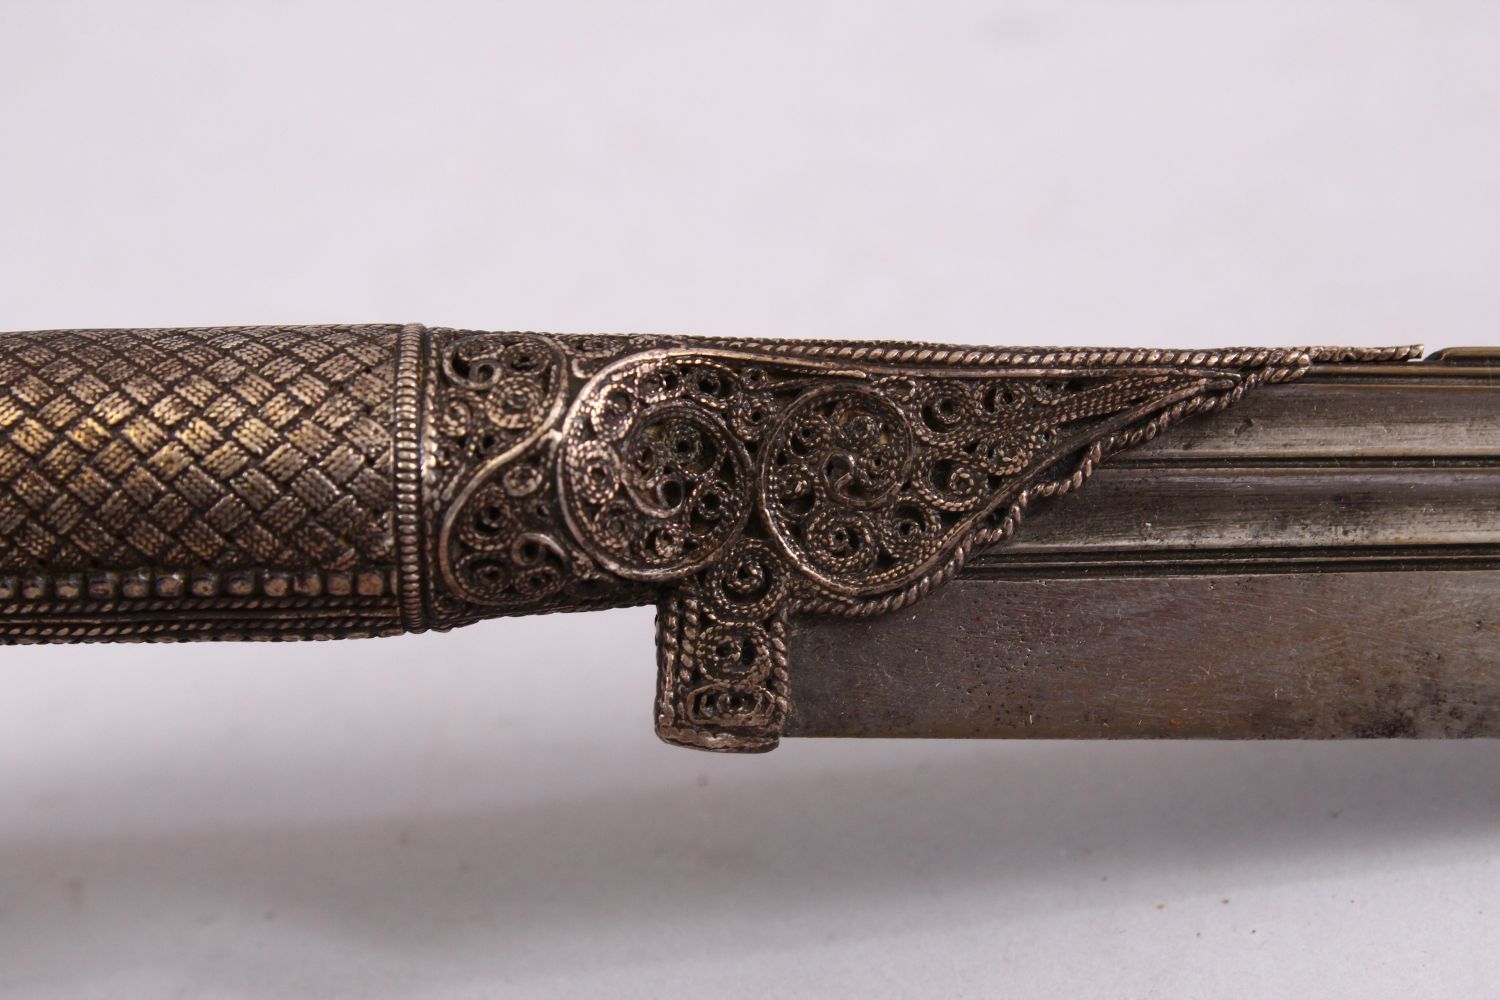 AN 18TH CENTURY OTTOMAN FINE SILVER WORK HANDLED SULTANS HANCER / DAGGER, with silver filigree style - Image 4 of 5